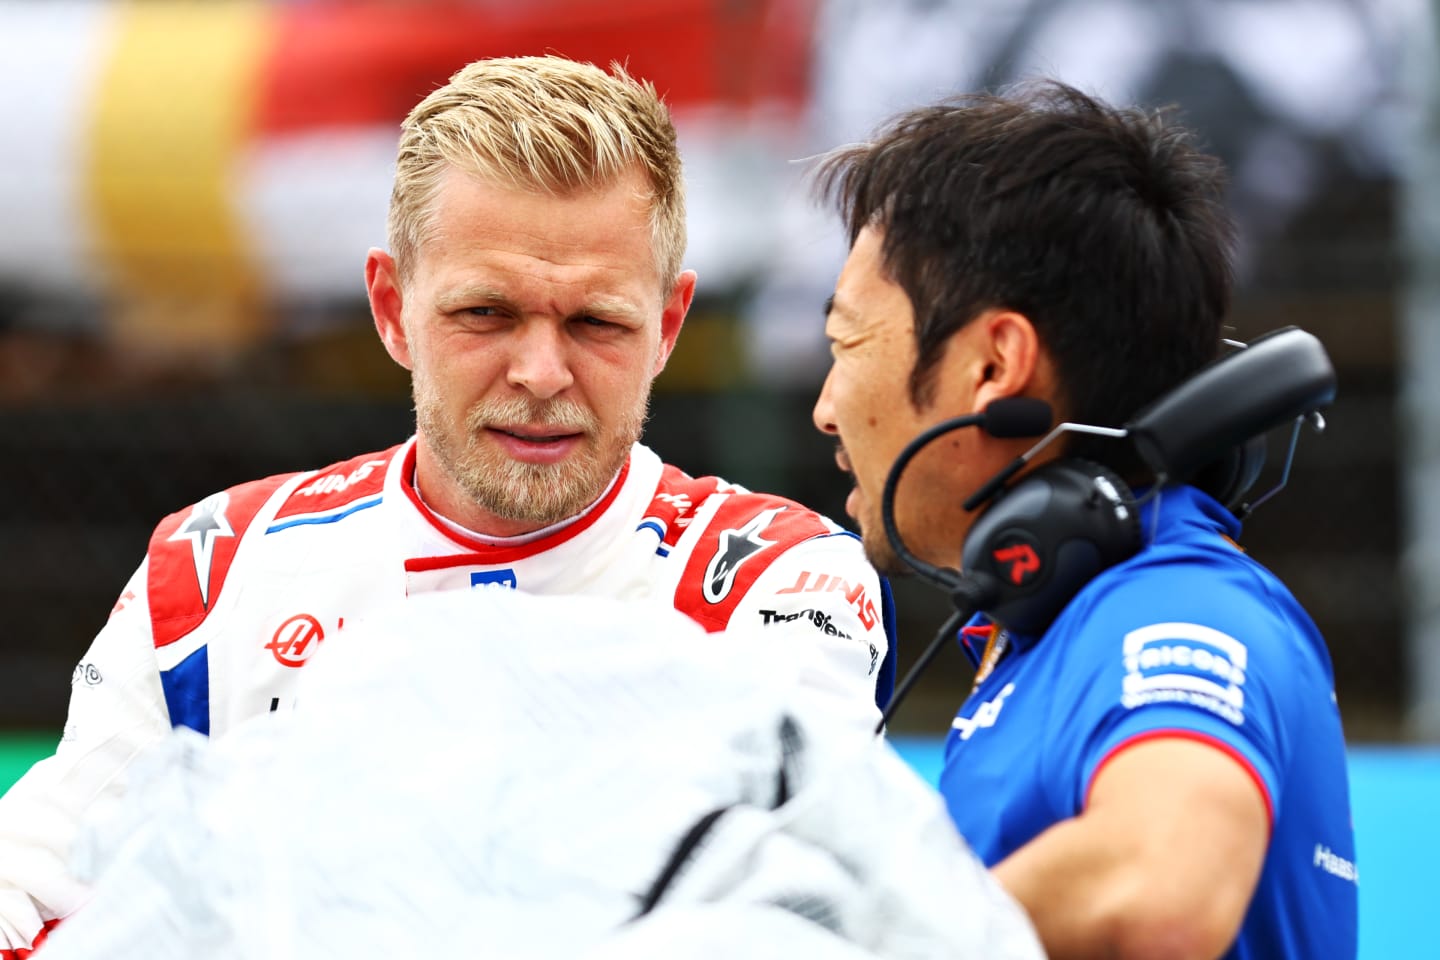 BUDAPEST, HUNGARY - JULY 31: Kevin Magnussen of Denmark and Haas F1 prepares to drive on the grid during the F1 Grand Prix of Hungary at Hungaroring on July 31, 2022 in Budapest, Hungary. (Photo by Mark Thompson/Getty Images)